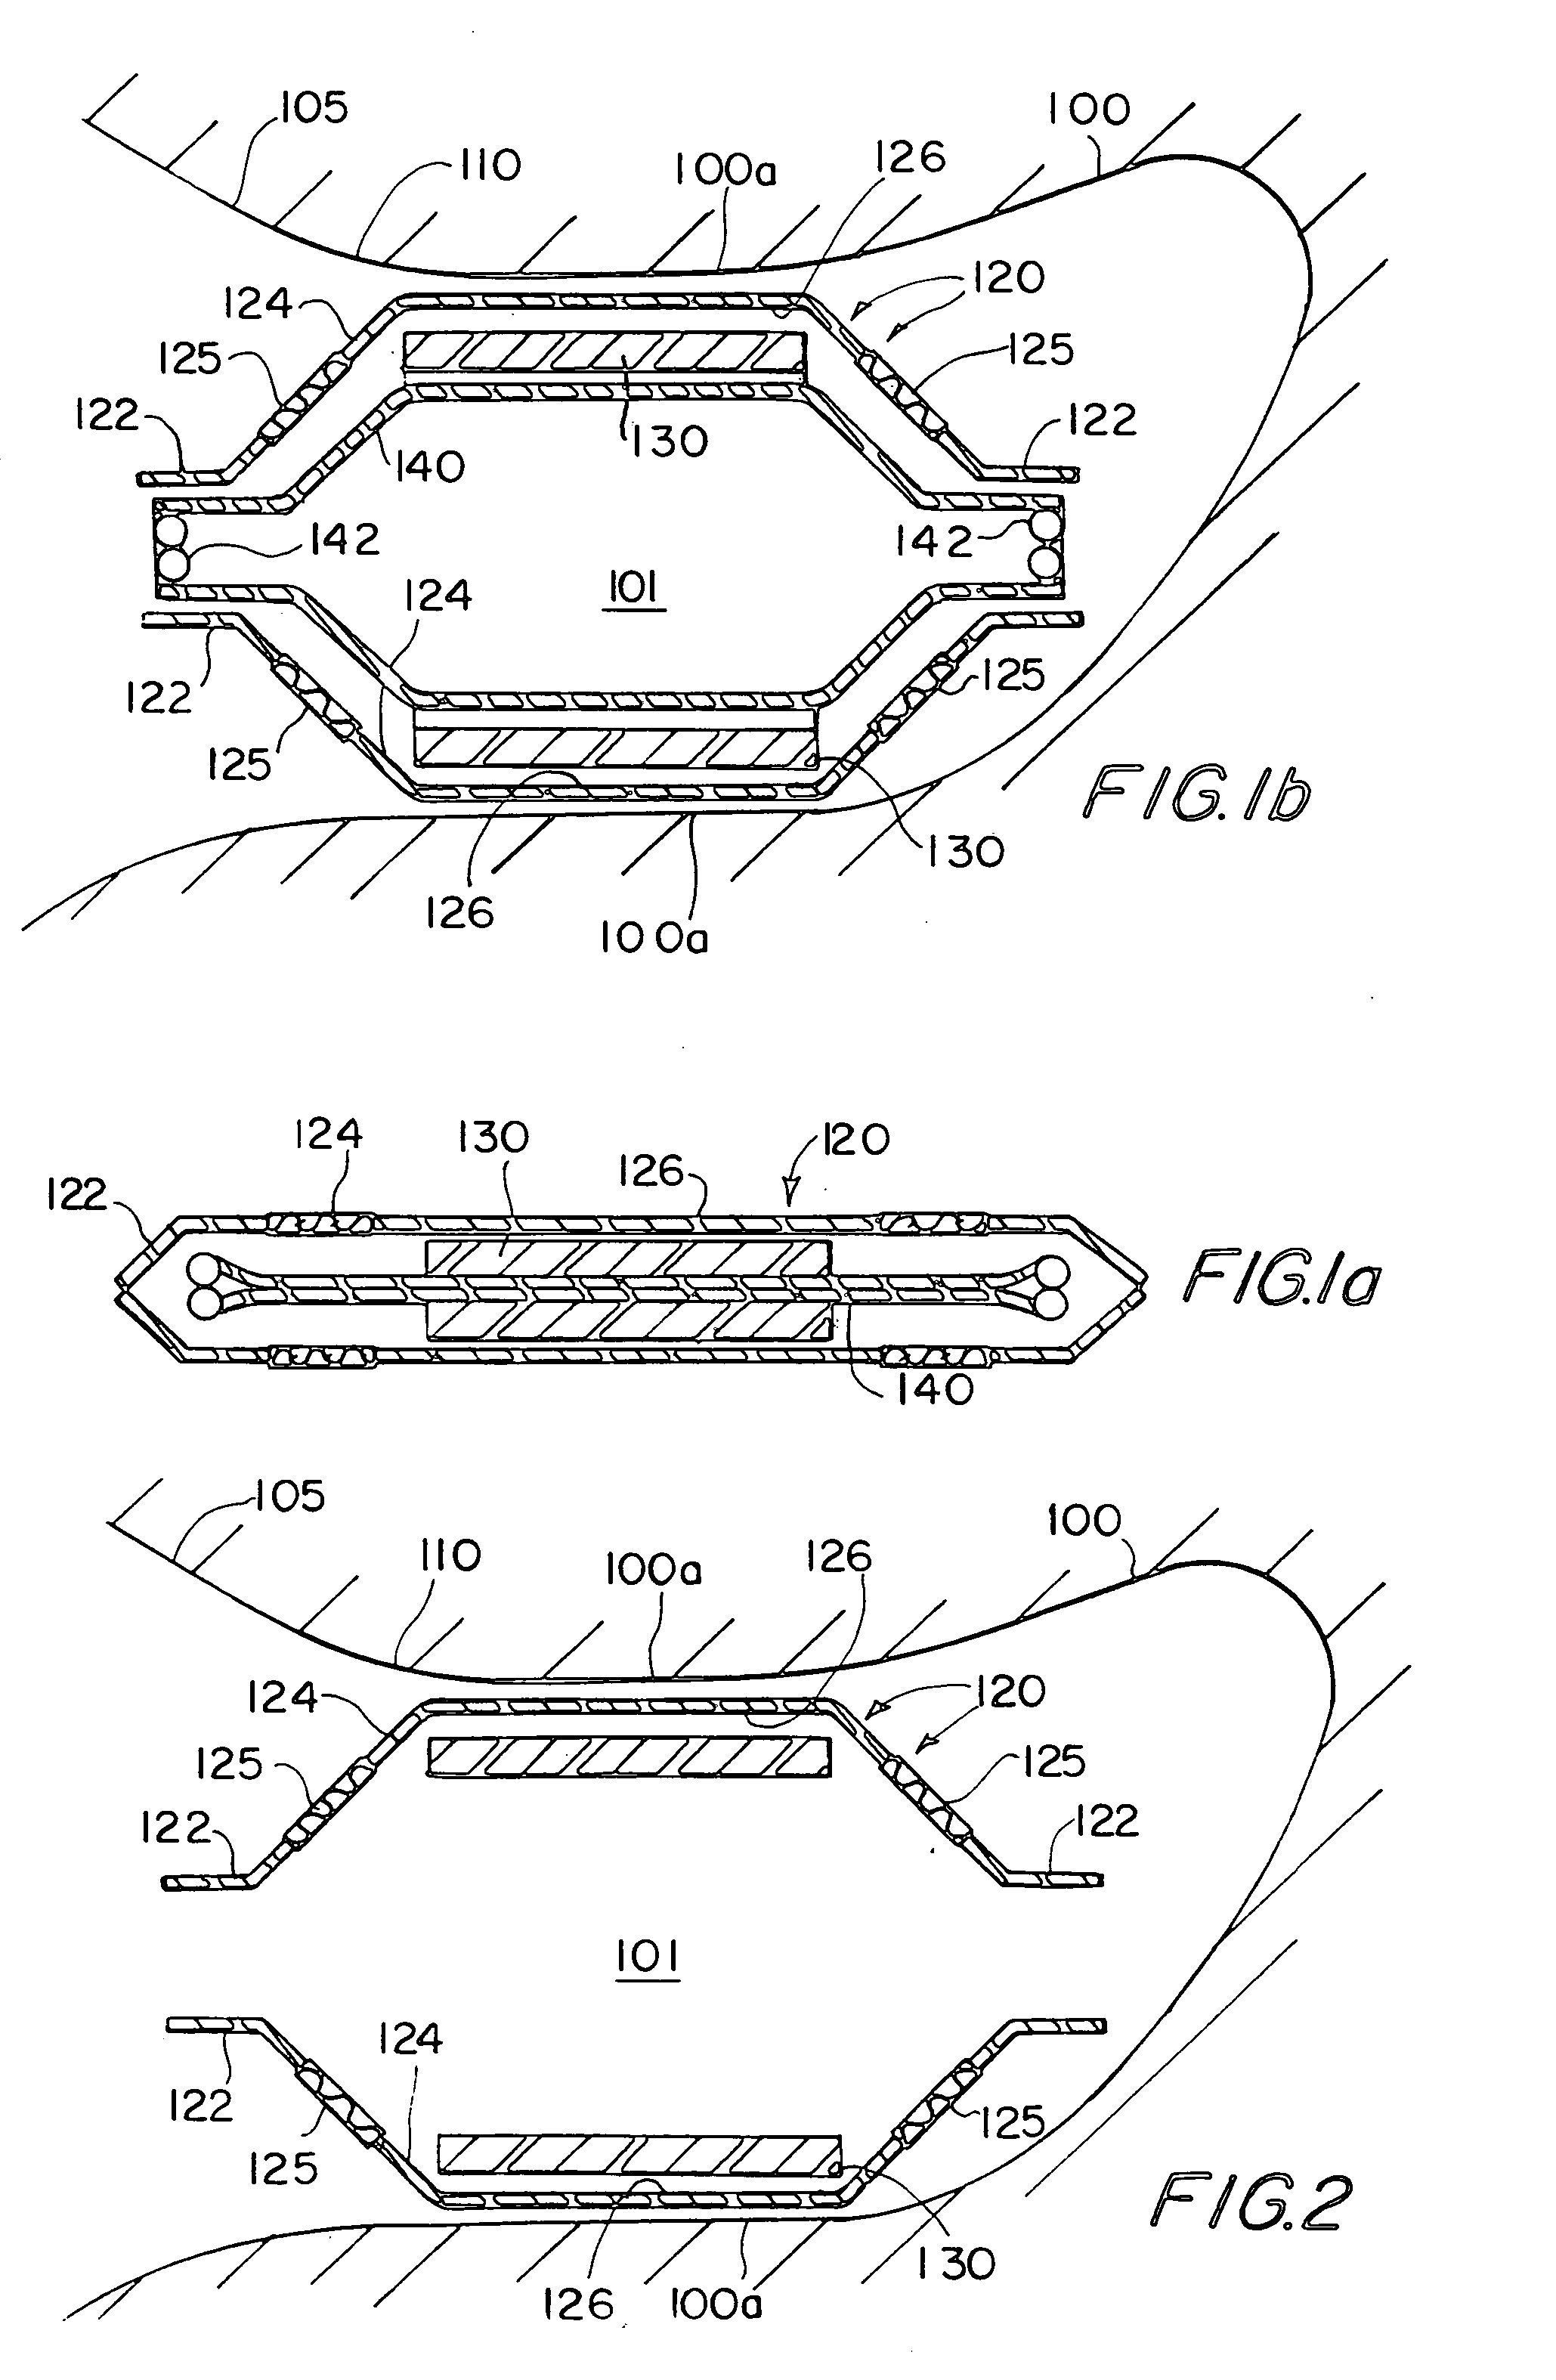 Expandable implant devices for filtering blood flow from atrial appendages